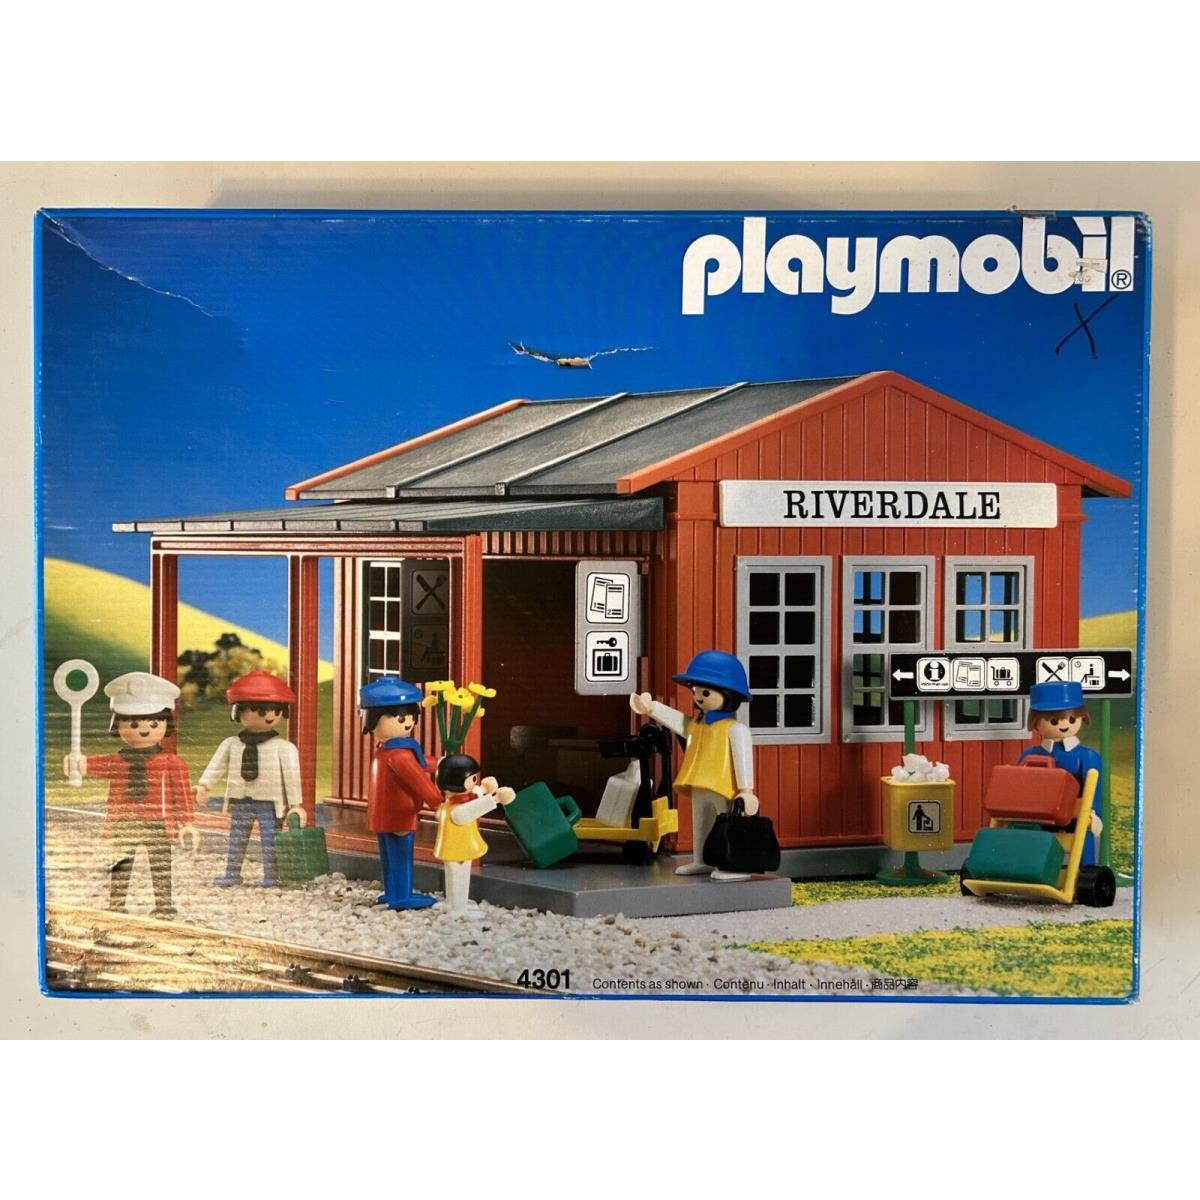 Playmobil 4301 Riverdale Station 1987 Open But